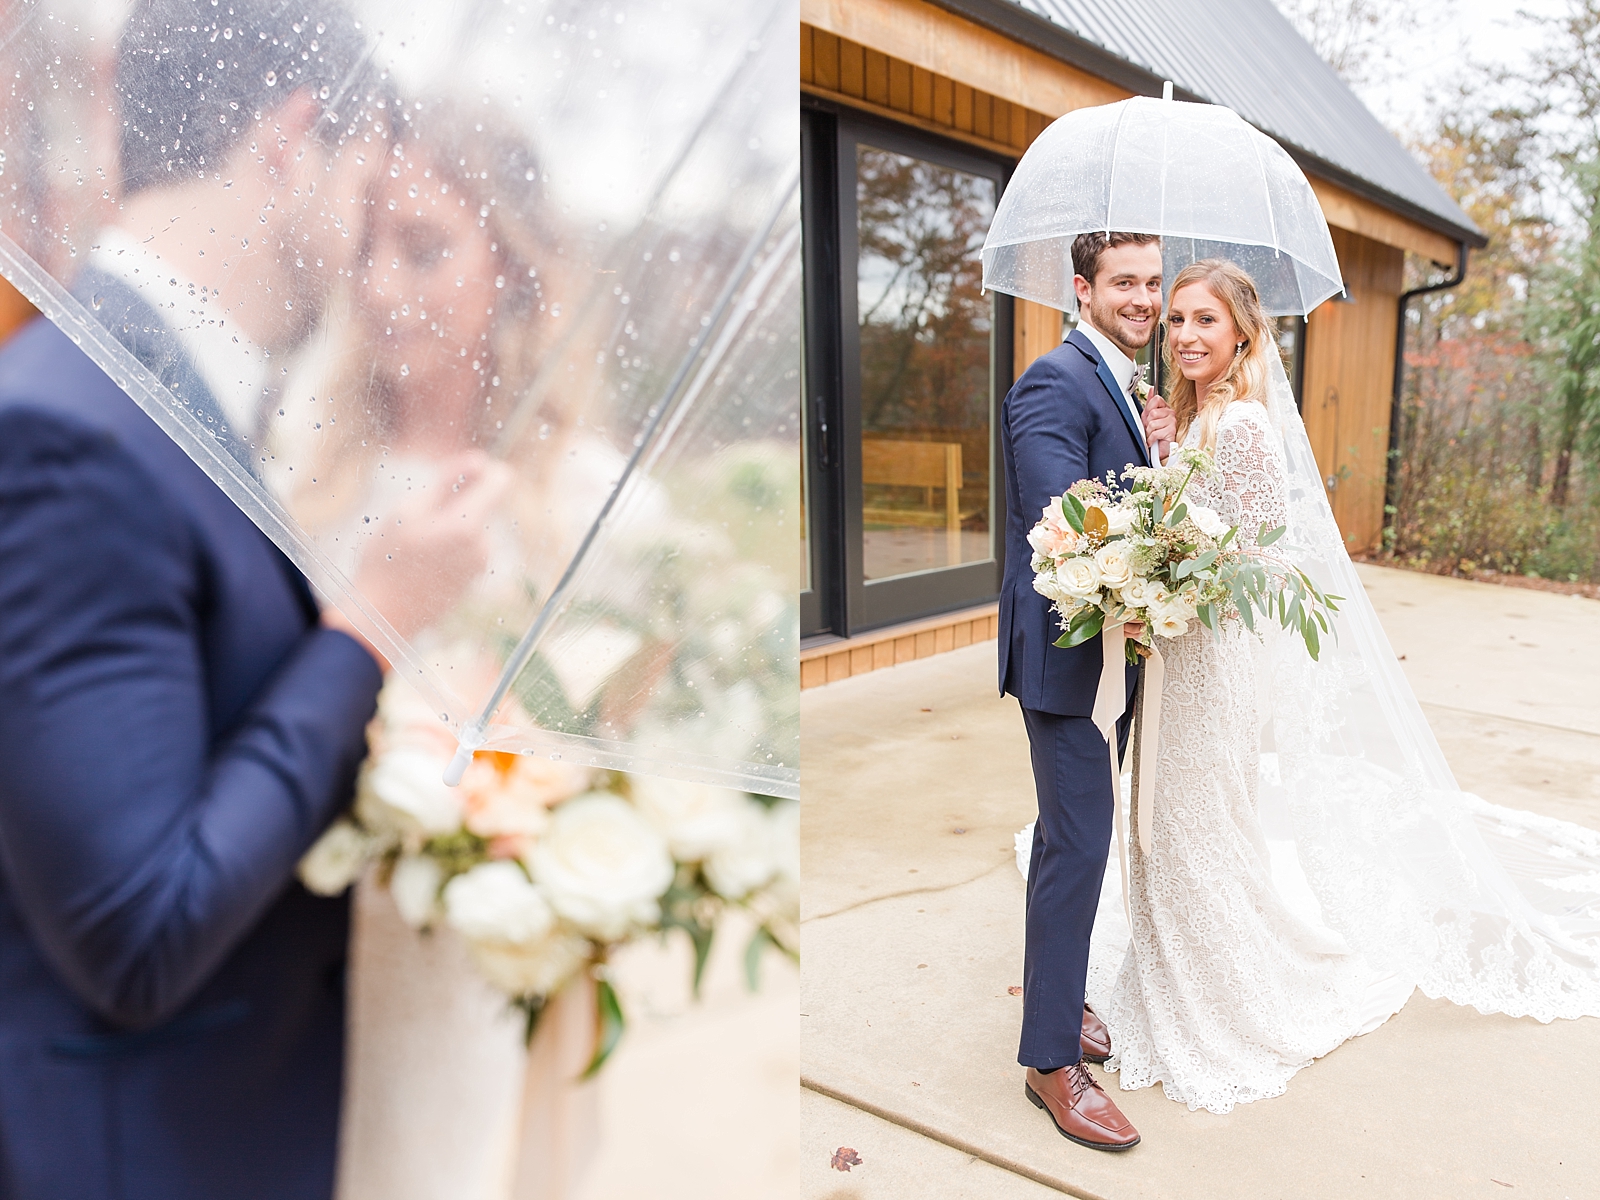 Juliette Chapel Wedding Couple snuggling under the umbrella and couple smiling at the camera under umbrella Photos